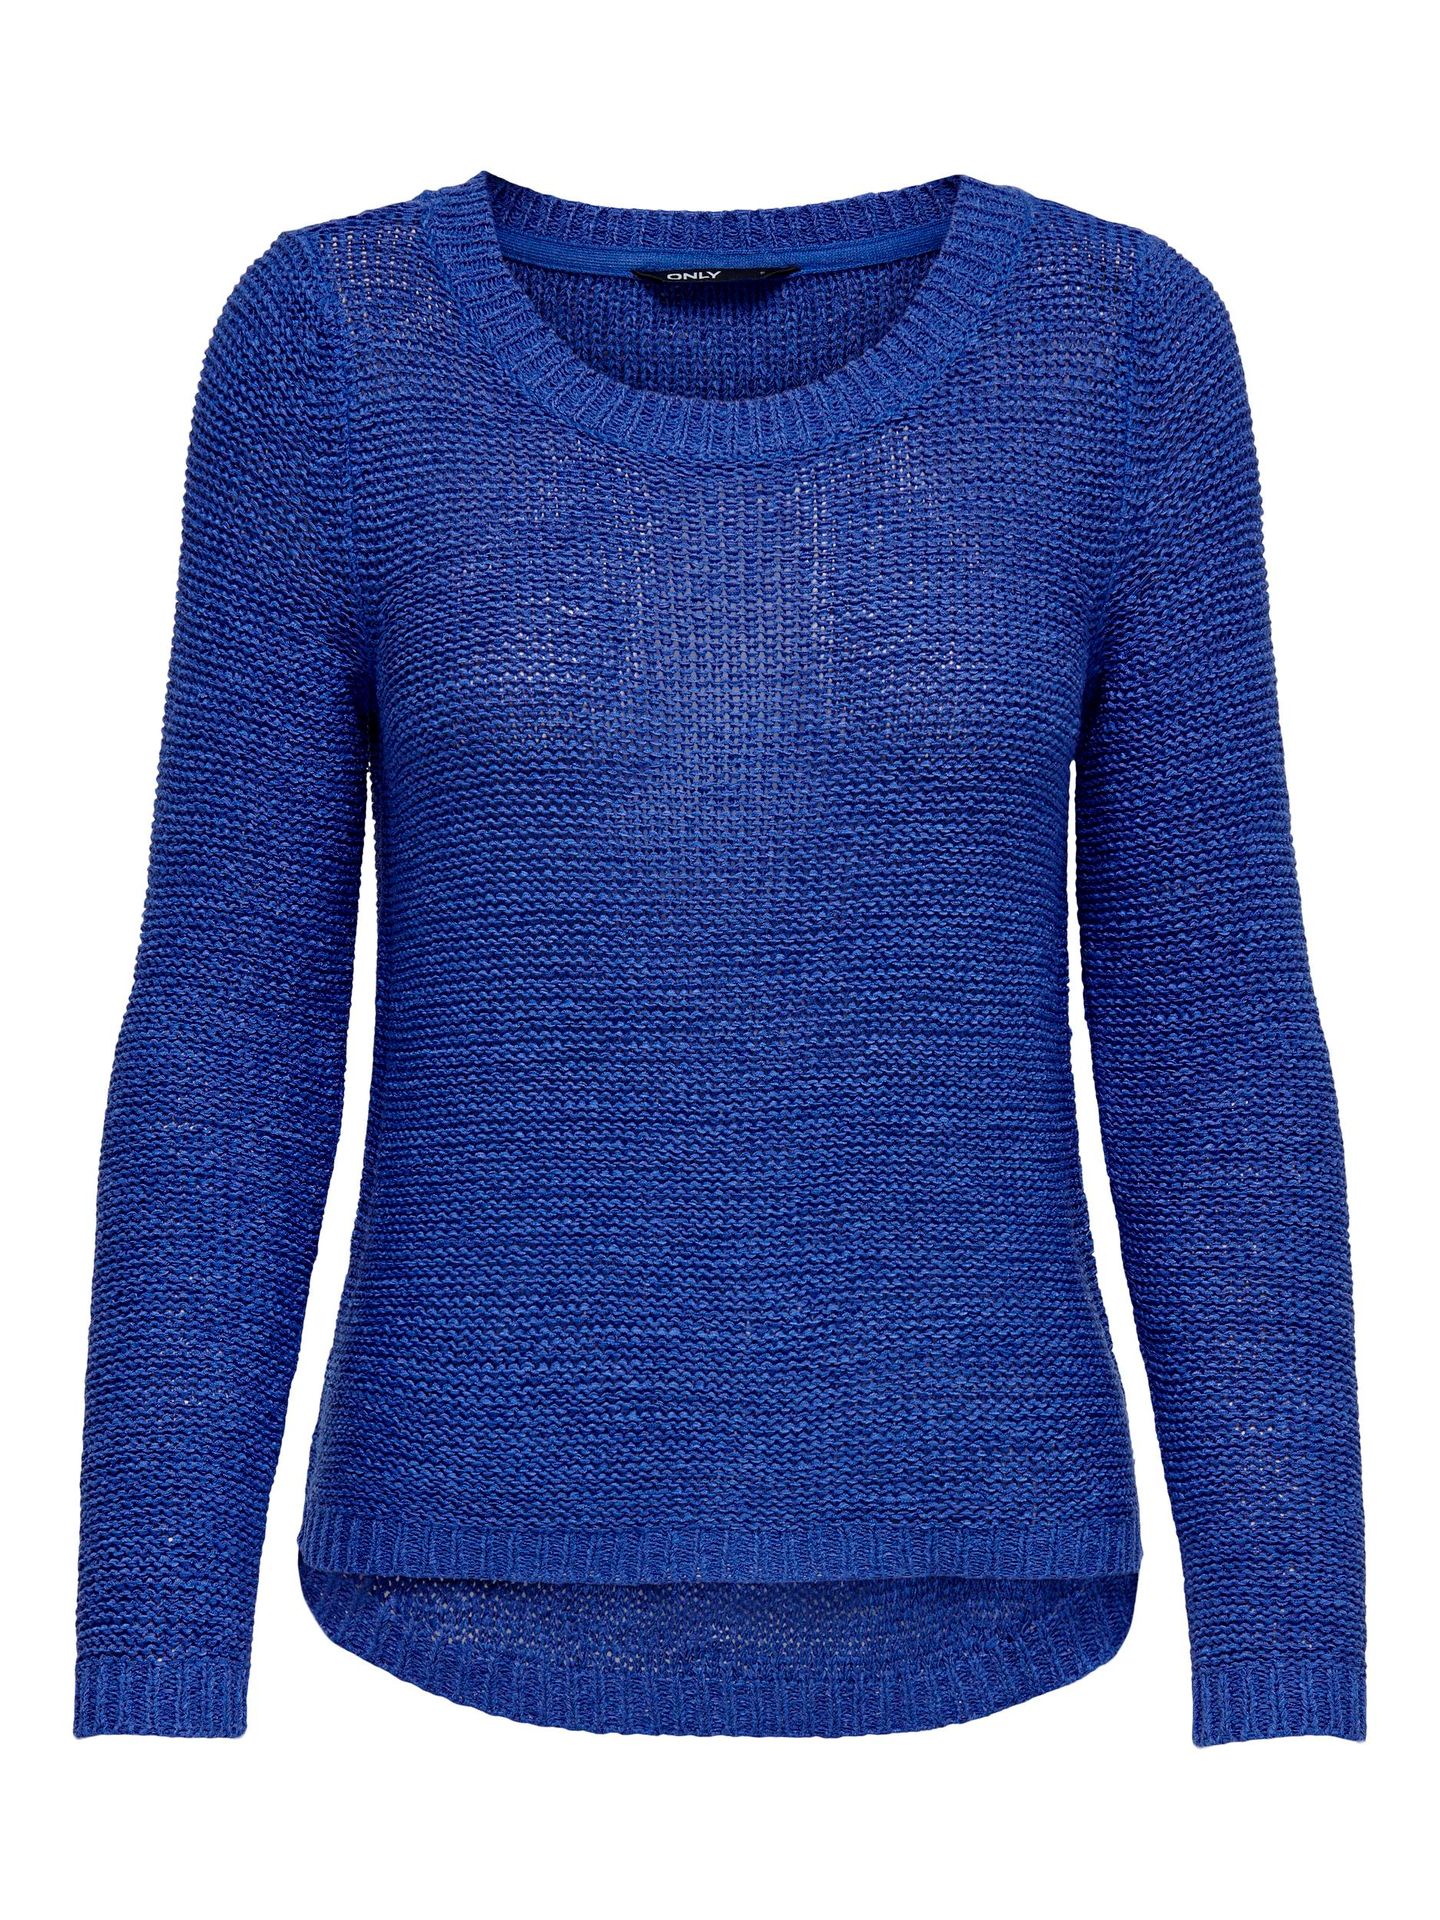 Only ONLGEENA XO L/S PULLOVER KNT NOOS Dazzling Blue 00102390-EKA26011400000536